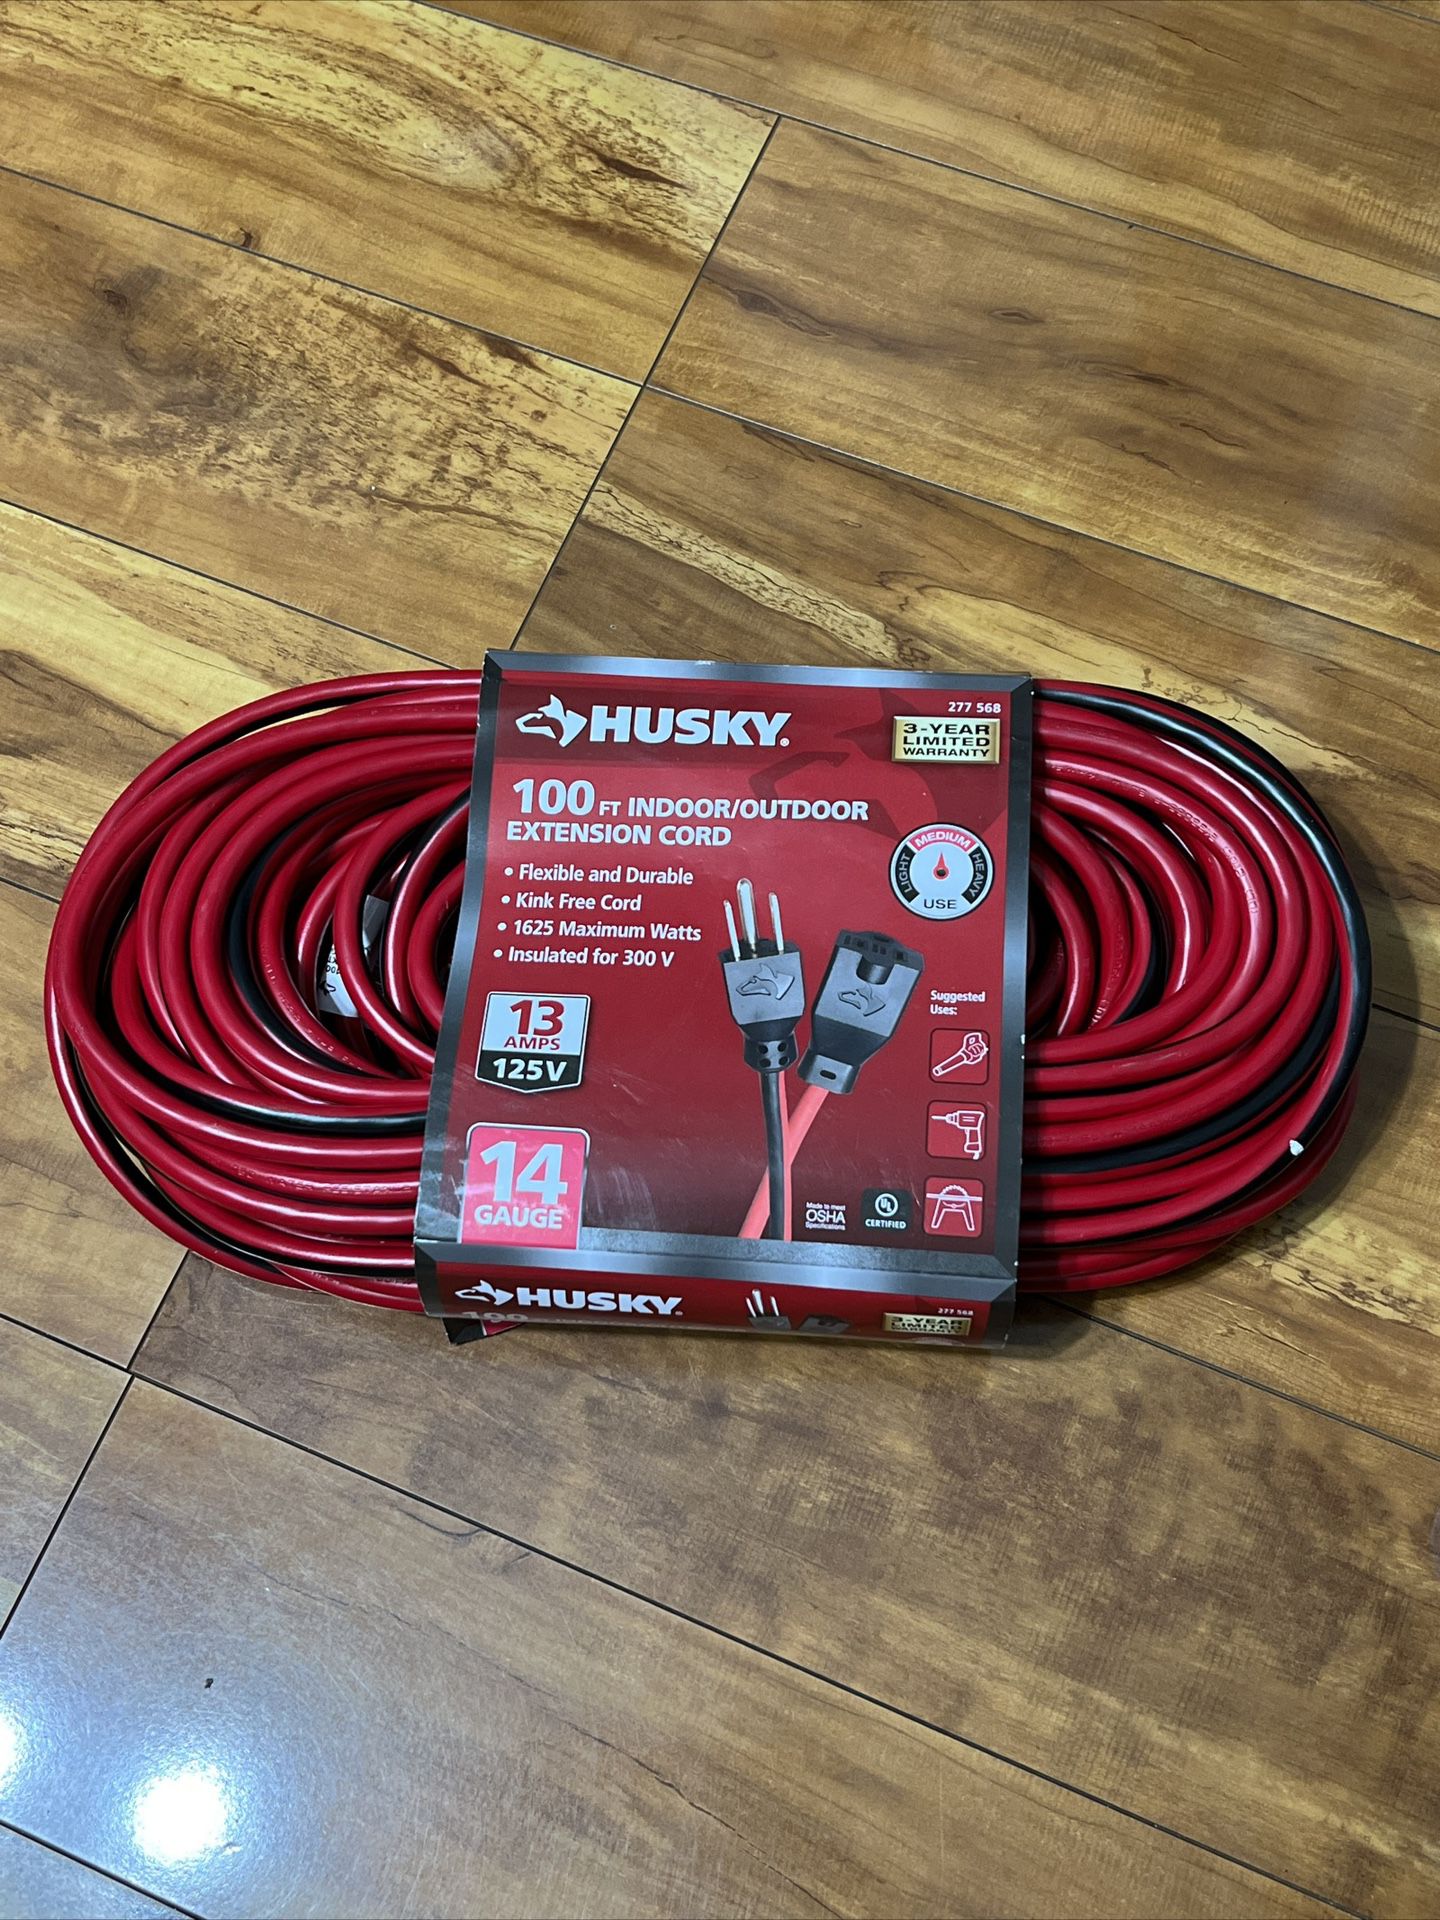 Husky 100ft Extension Cord for Sale in South Houston, TX - OfferUp